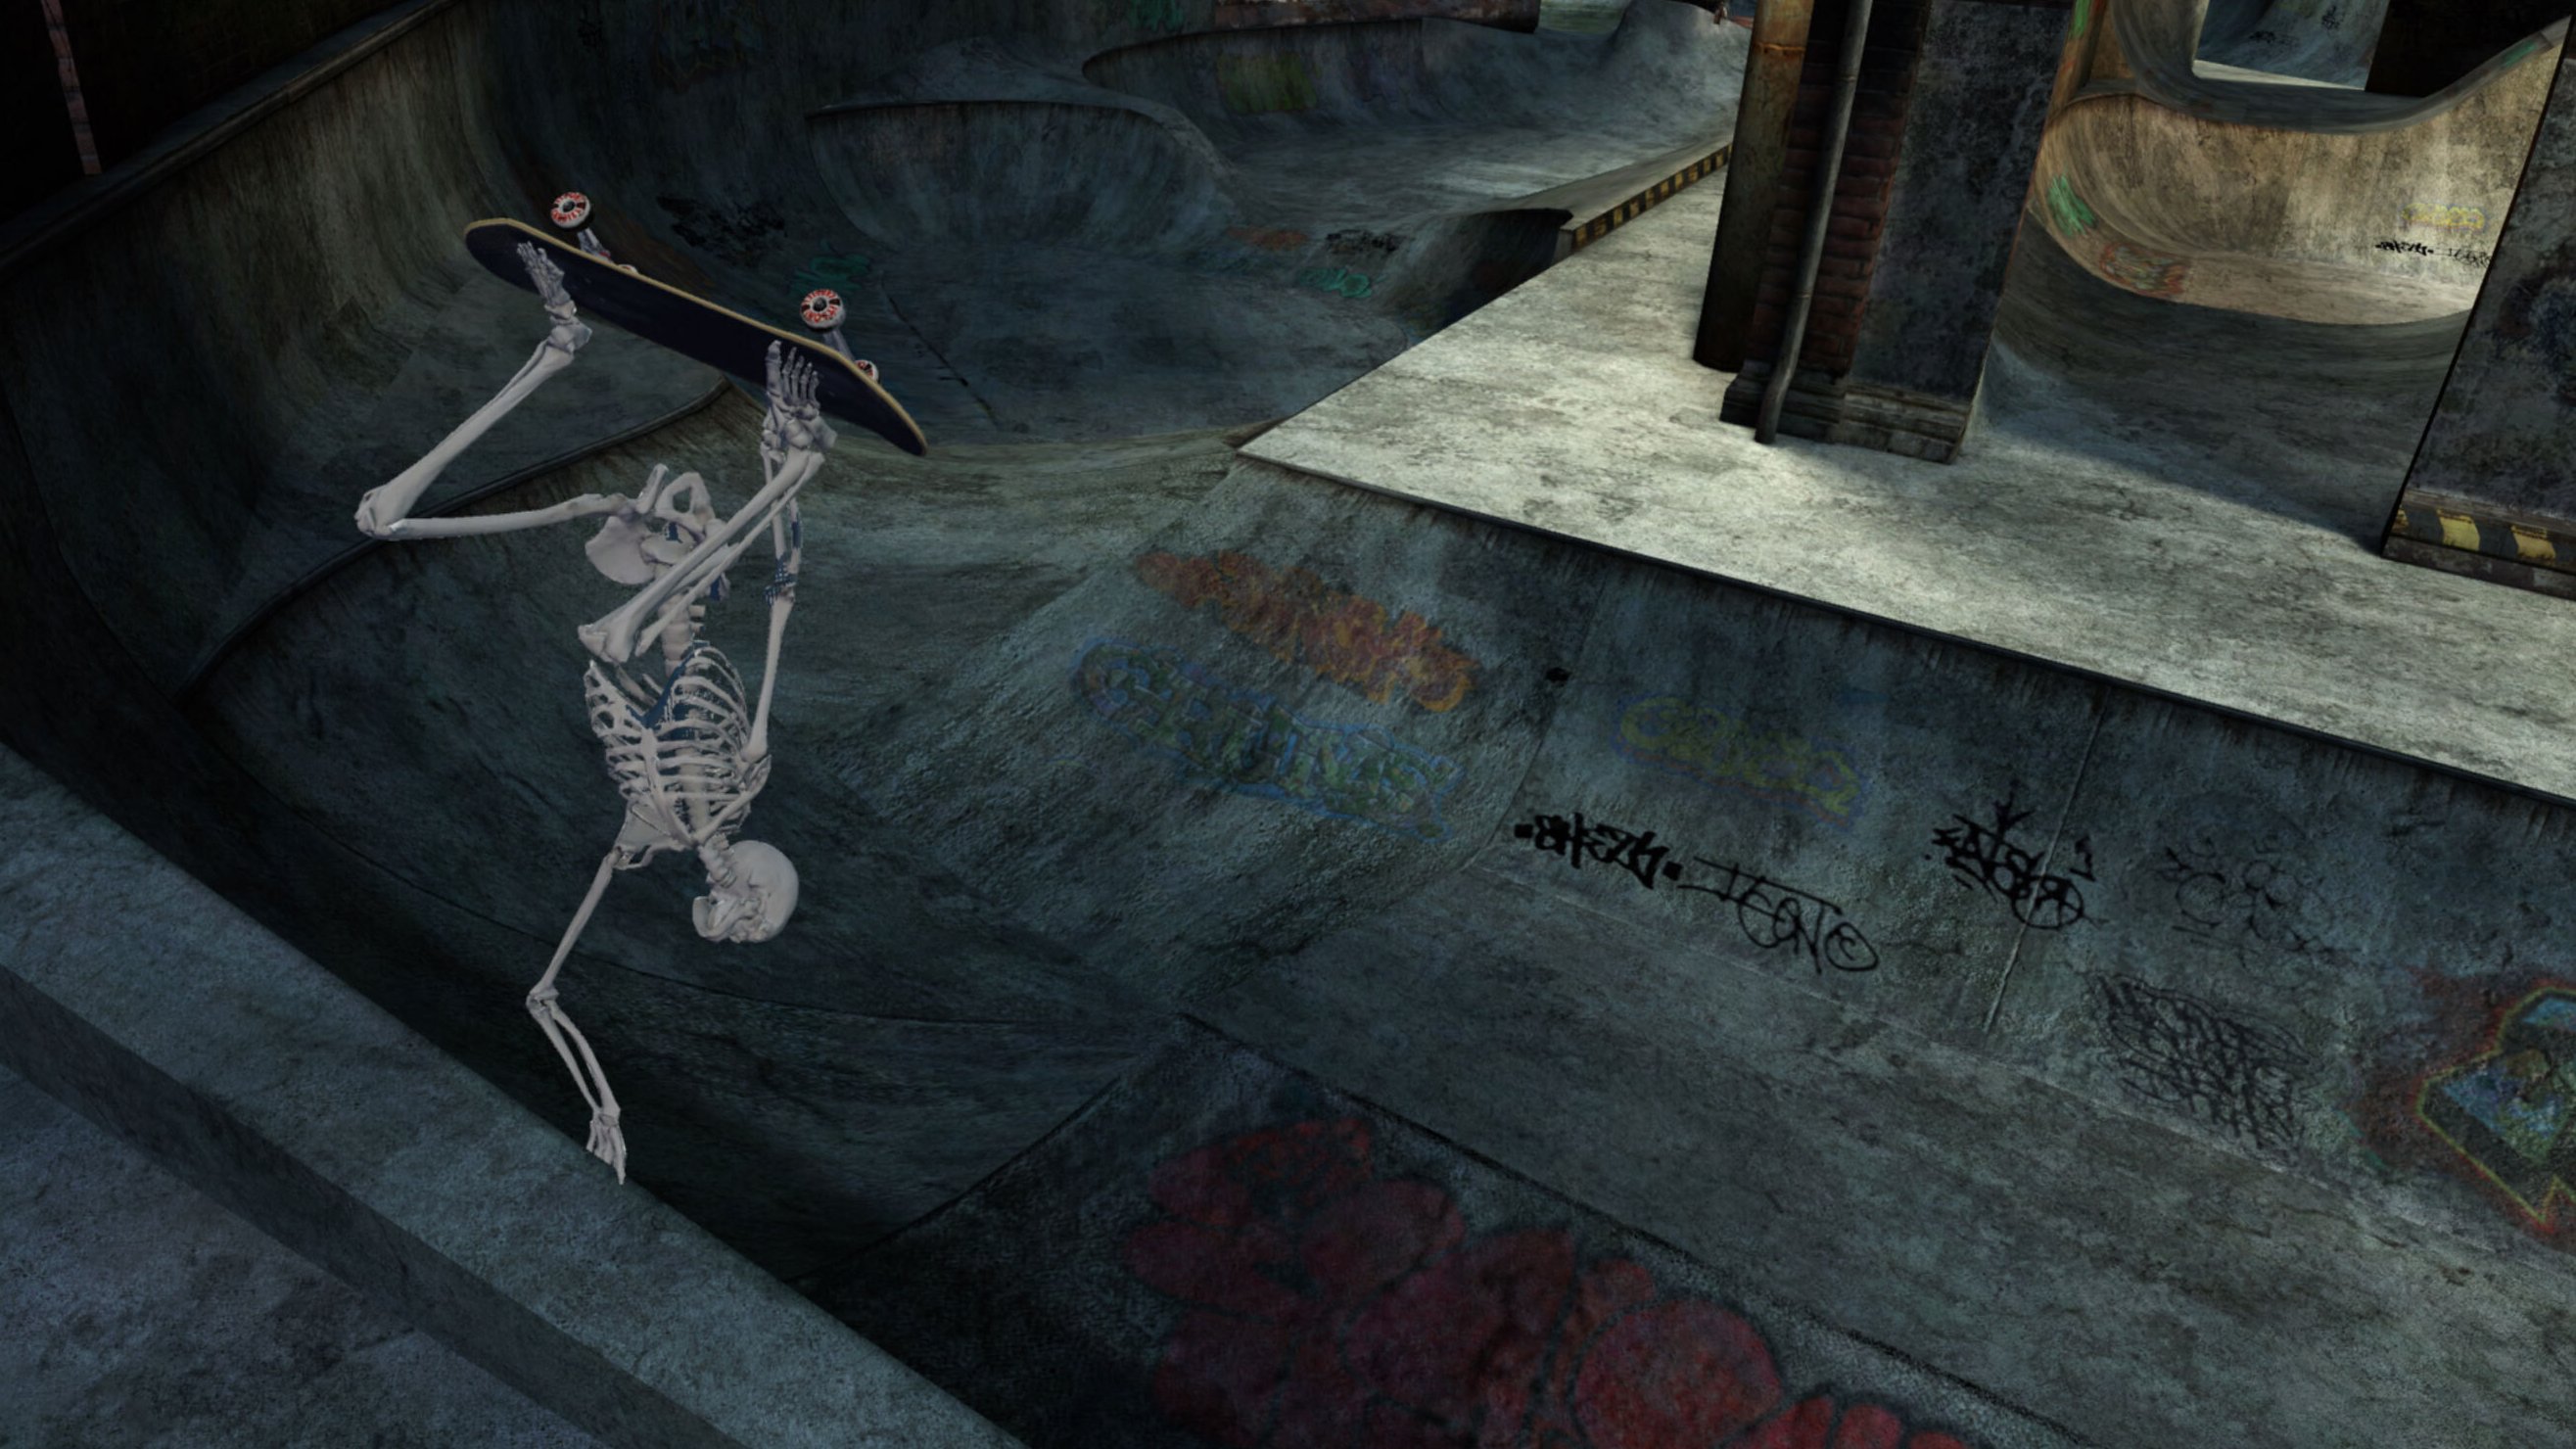 skate. on X: tricks for treats! submit your spookiest clips featuring Dem  Bones and/or in the After Dark DLC in Skate 3 for a chance to win a year 3  deck. 💀👻